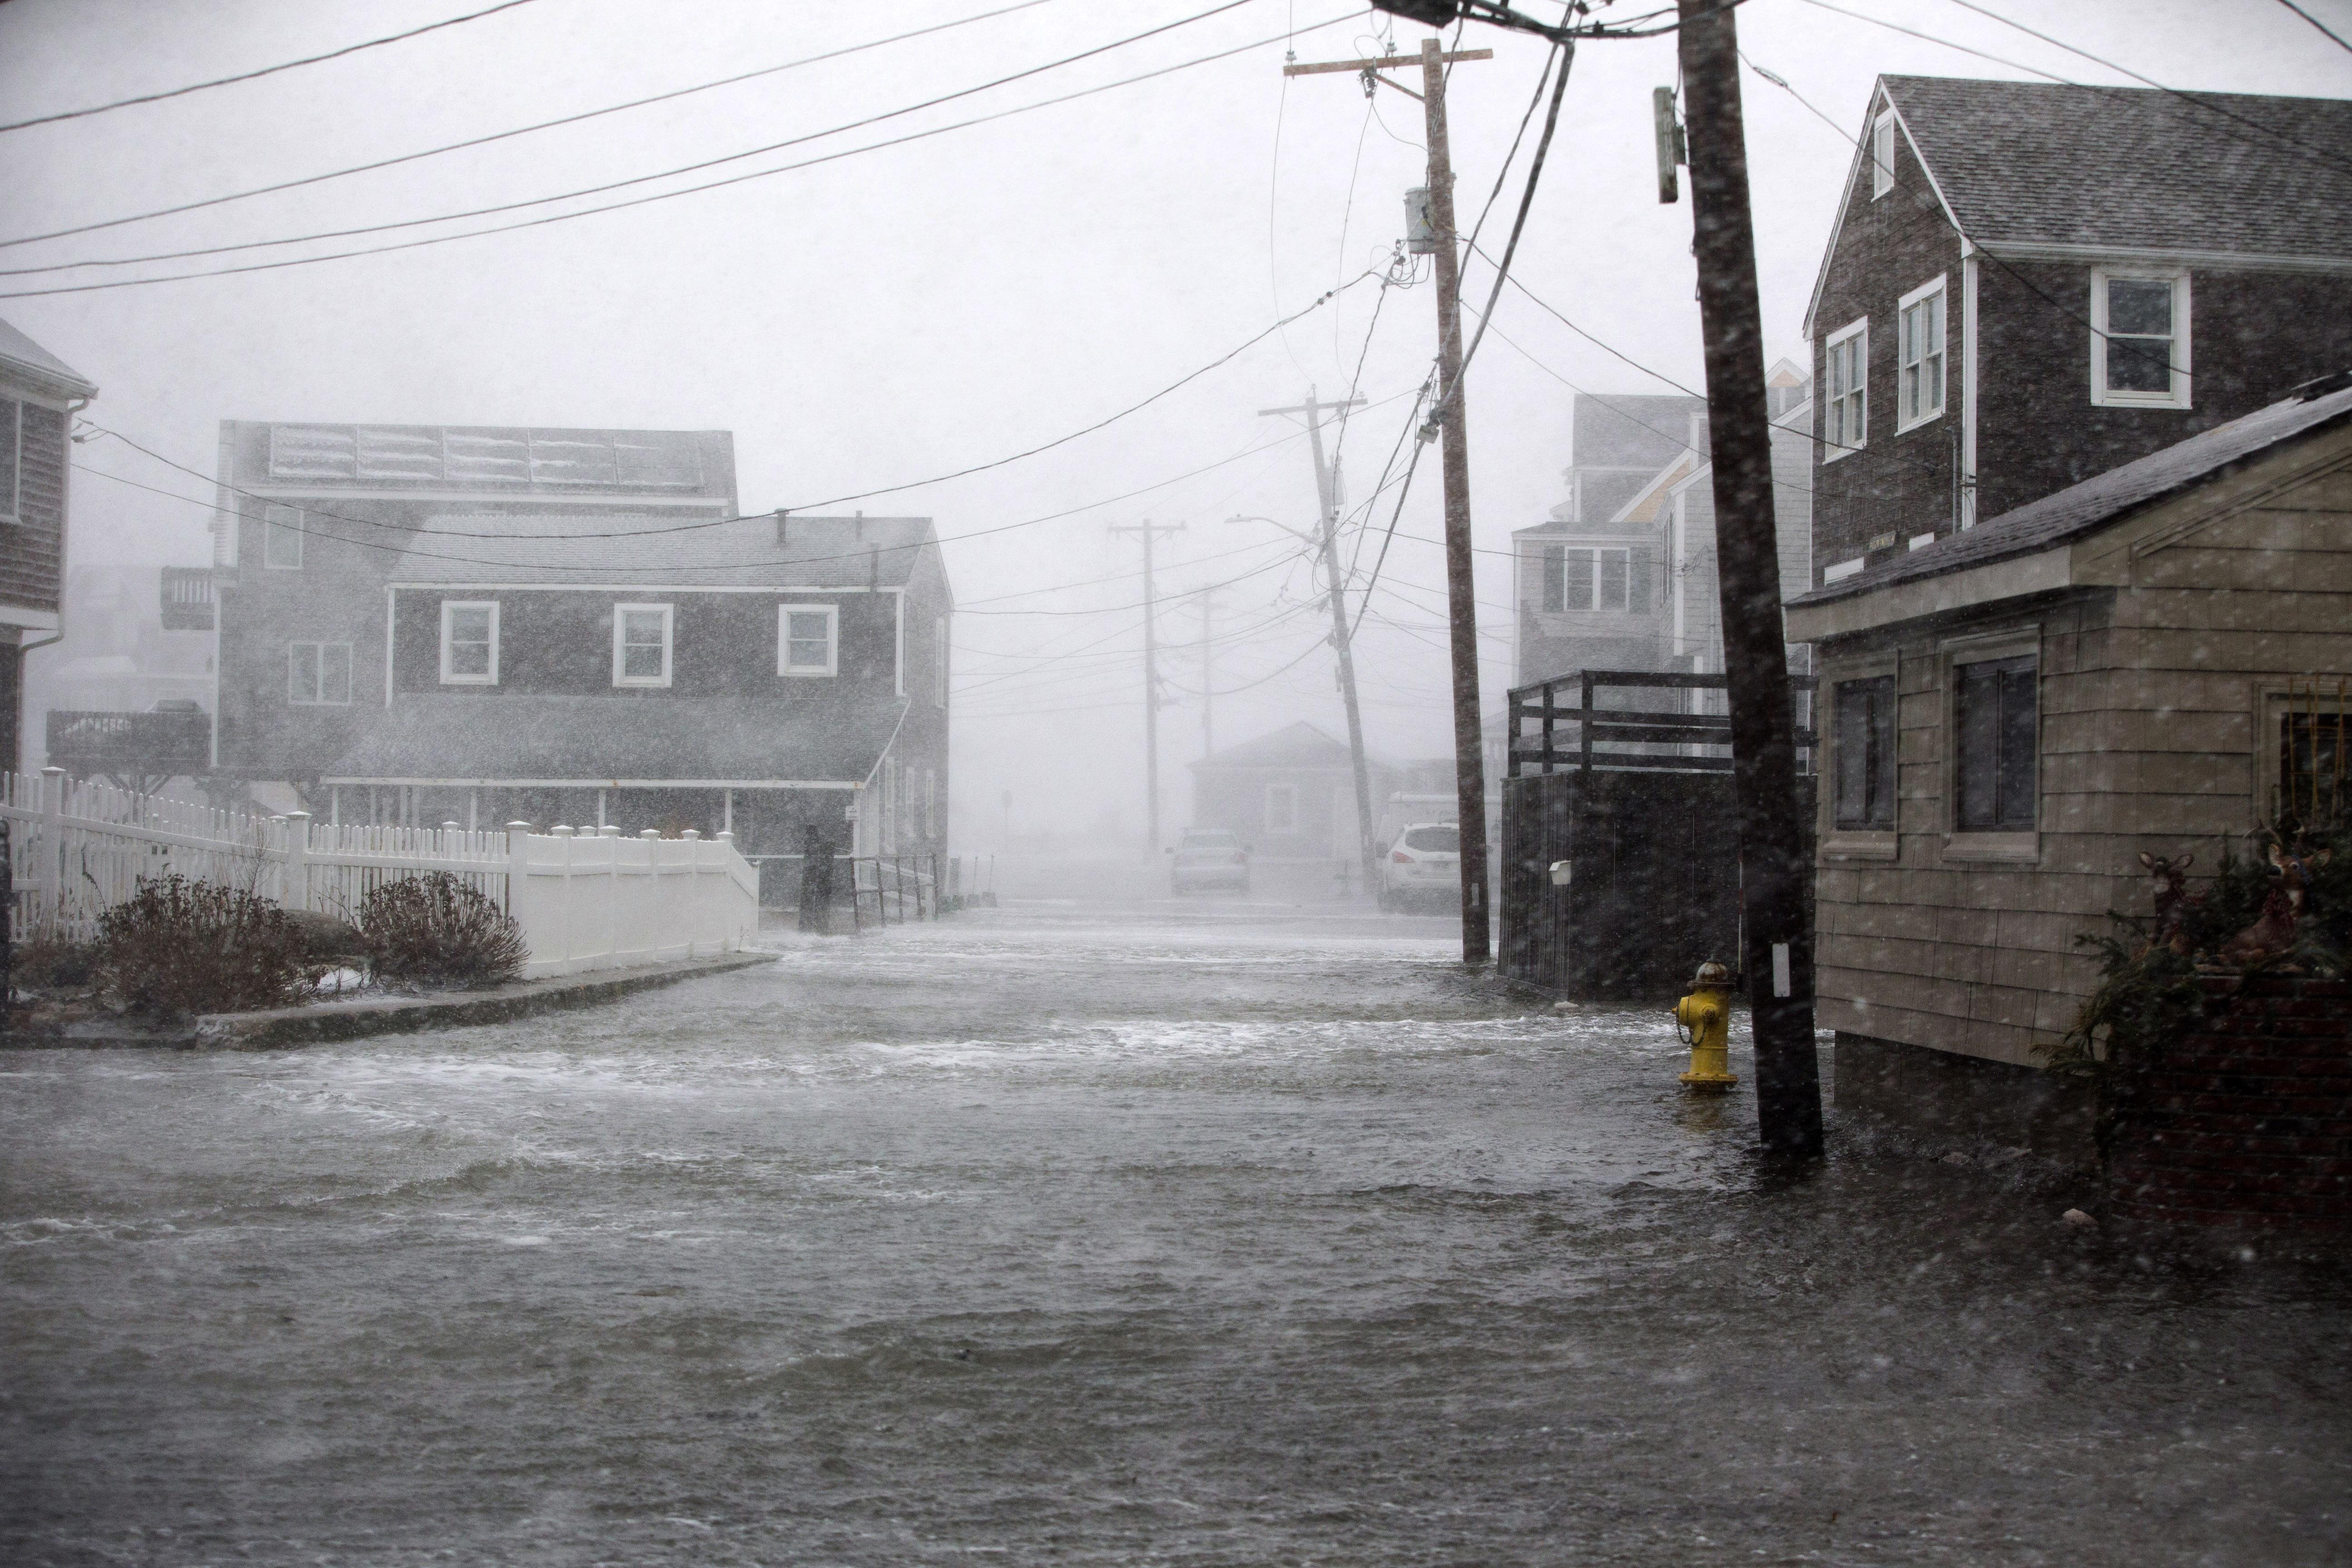 SCITUATE, MA - JANUARY 04: Lighthouse Rd. begins to flood as a massive winter storm begins to bear down on the region on January 4, 2018 in Scituate, Massachusetts. The 'bomb cyclone' was expected to dump heavy snows in New England as the storm system moved up the U.S. east coast.  (Photo by Scott Eisen/Getty Images)